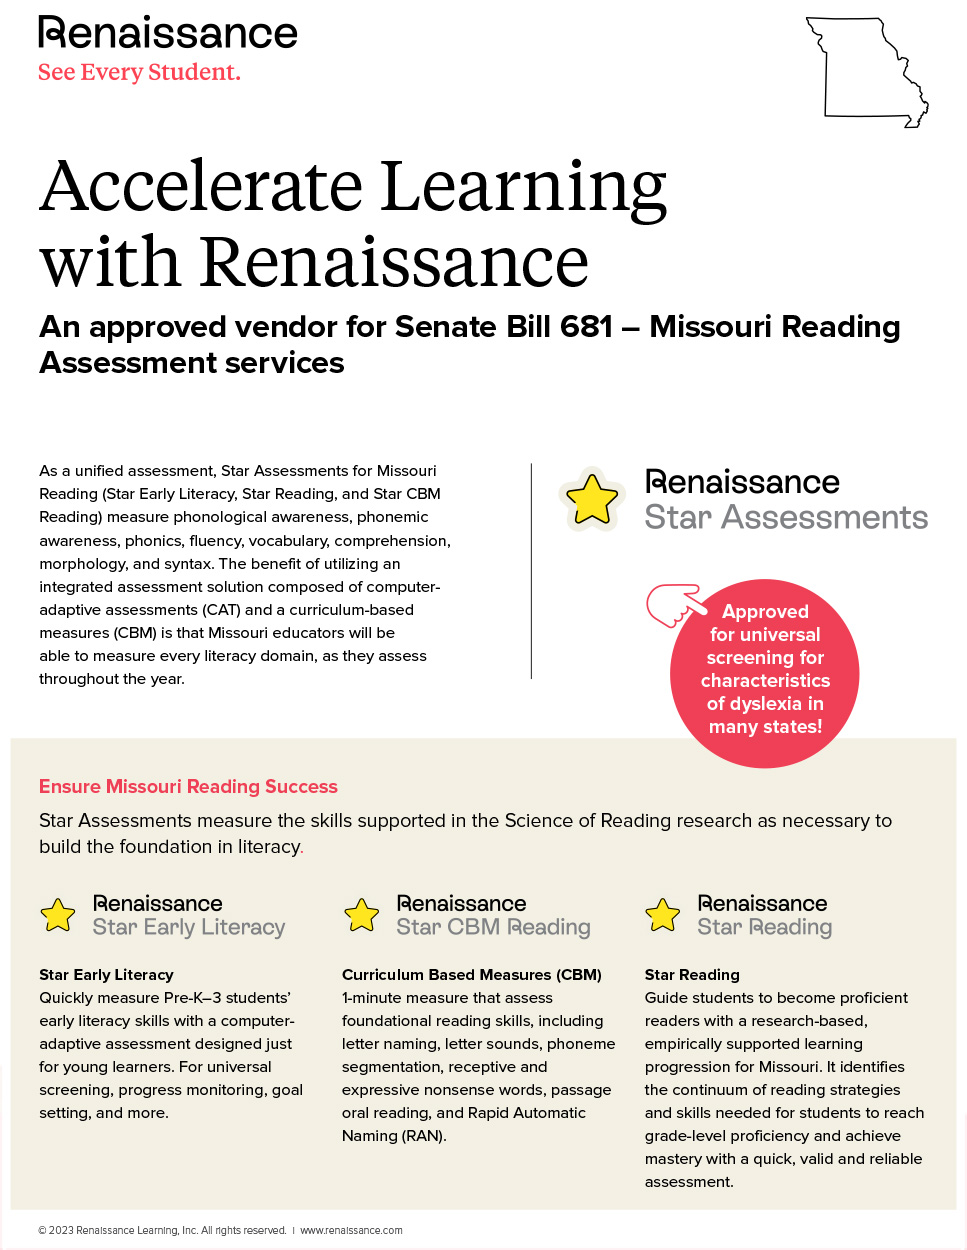 Accelerate Learning in Missouri with Renaissance (Flyer)